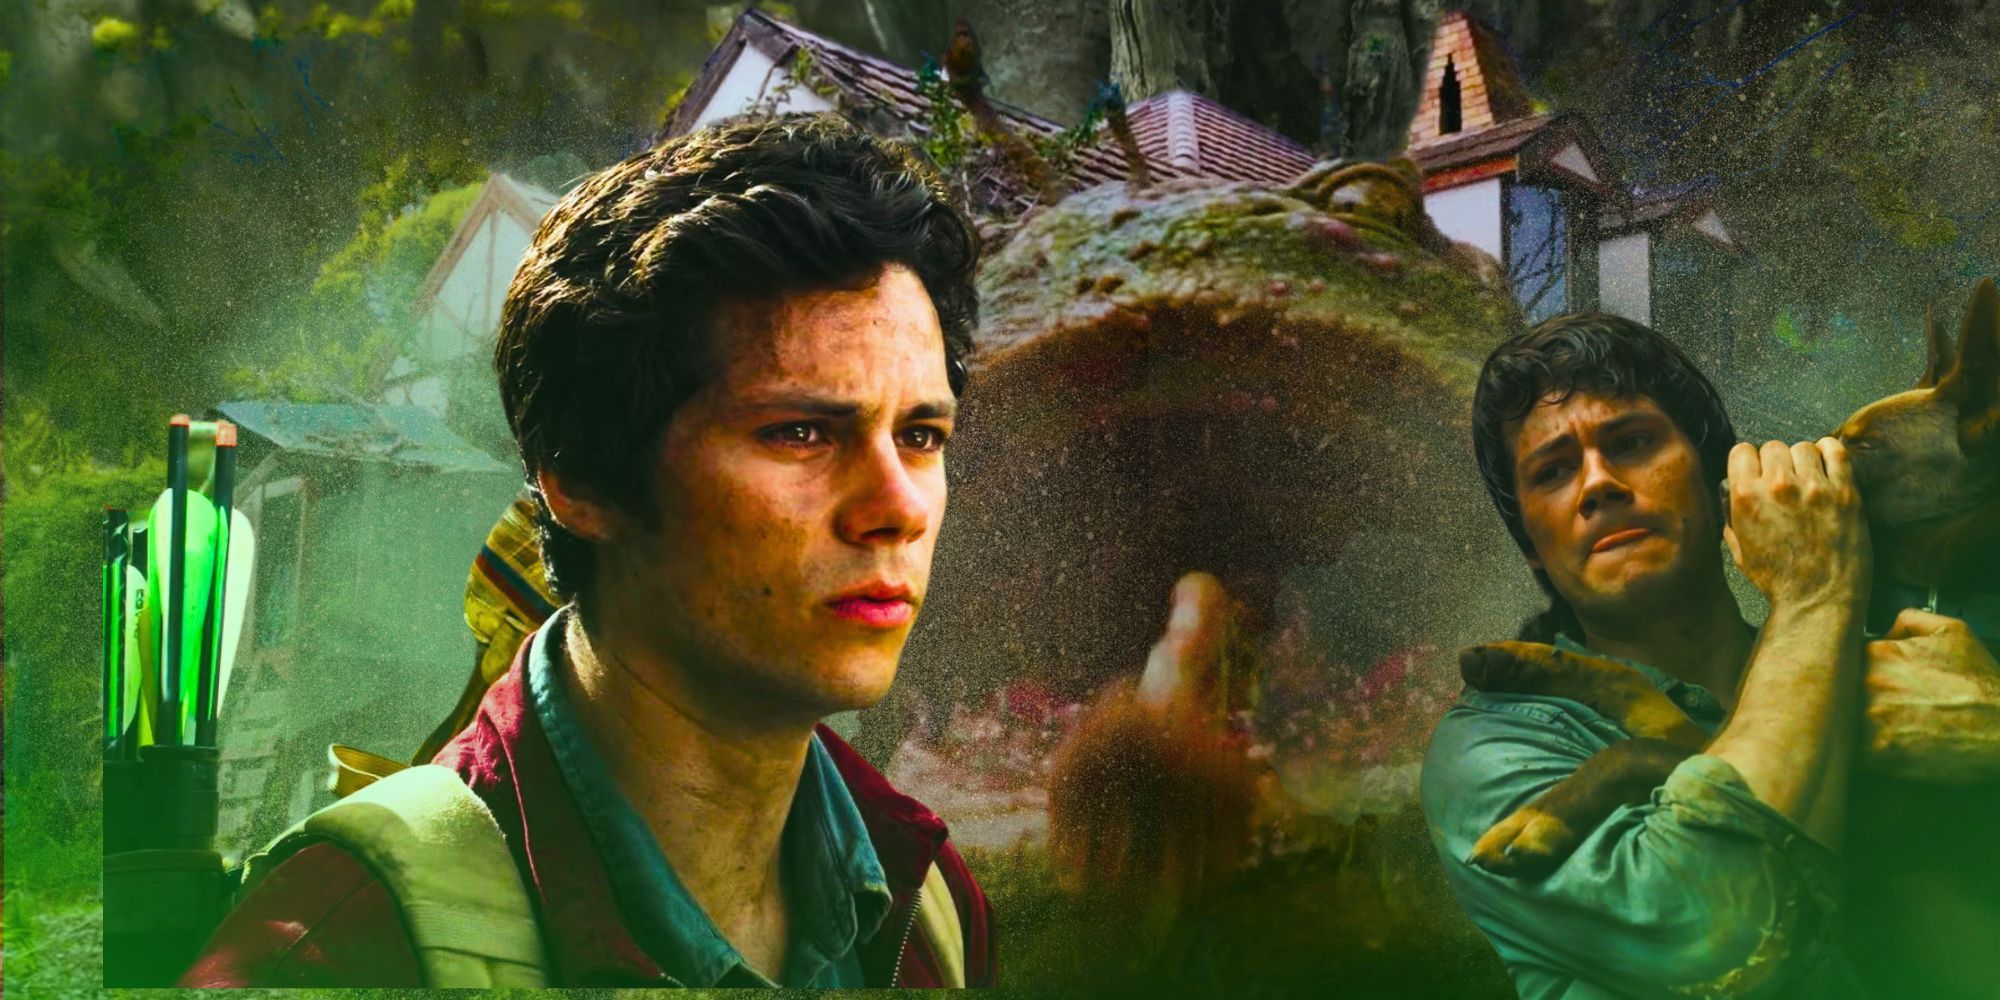 It Took 3 Years, But Dylan O'Brien's Forgotten Monster Movie Is Finally Getting The Attention It Deserves